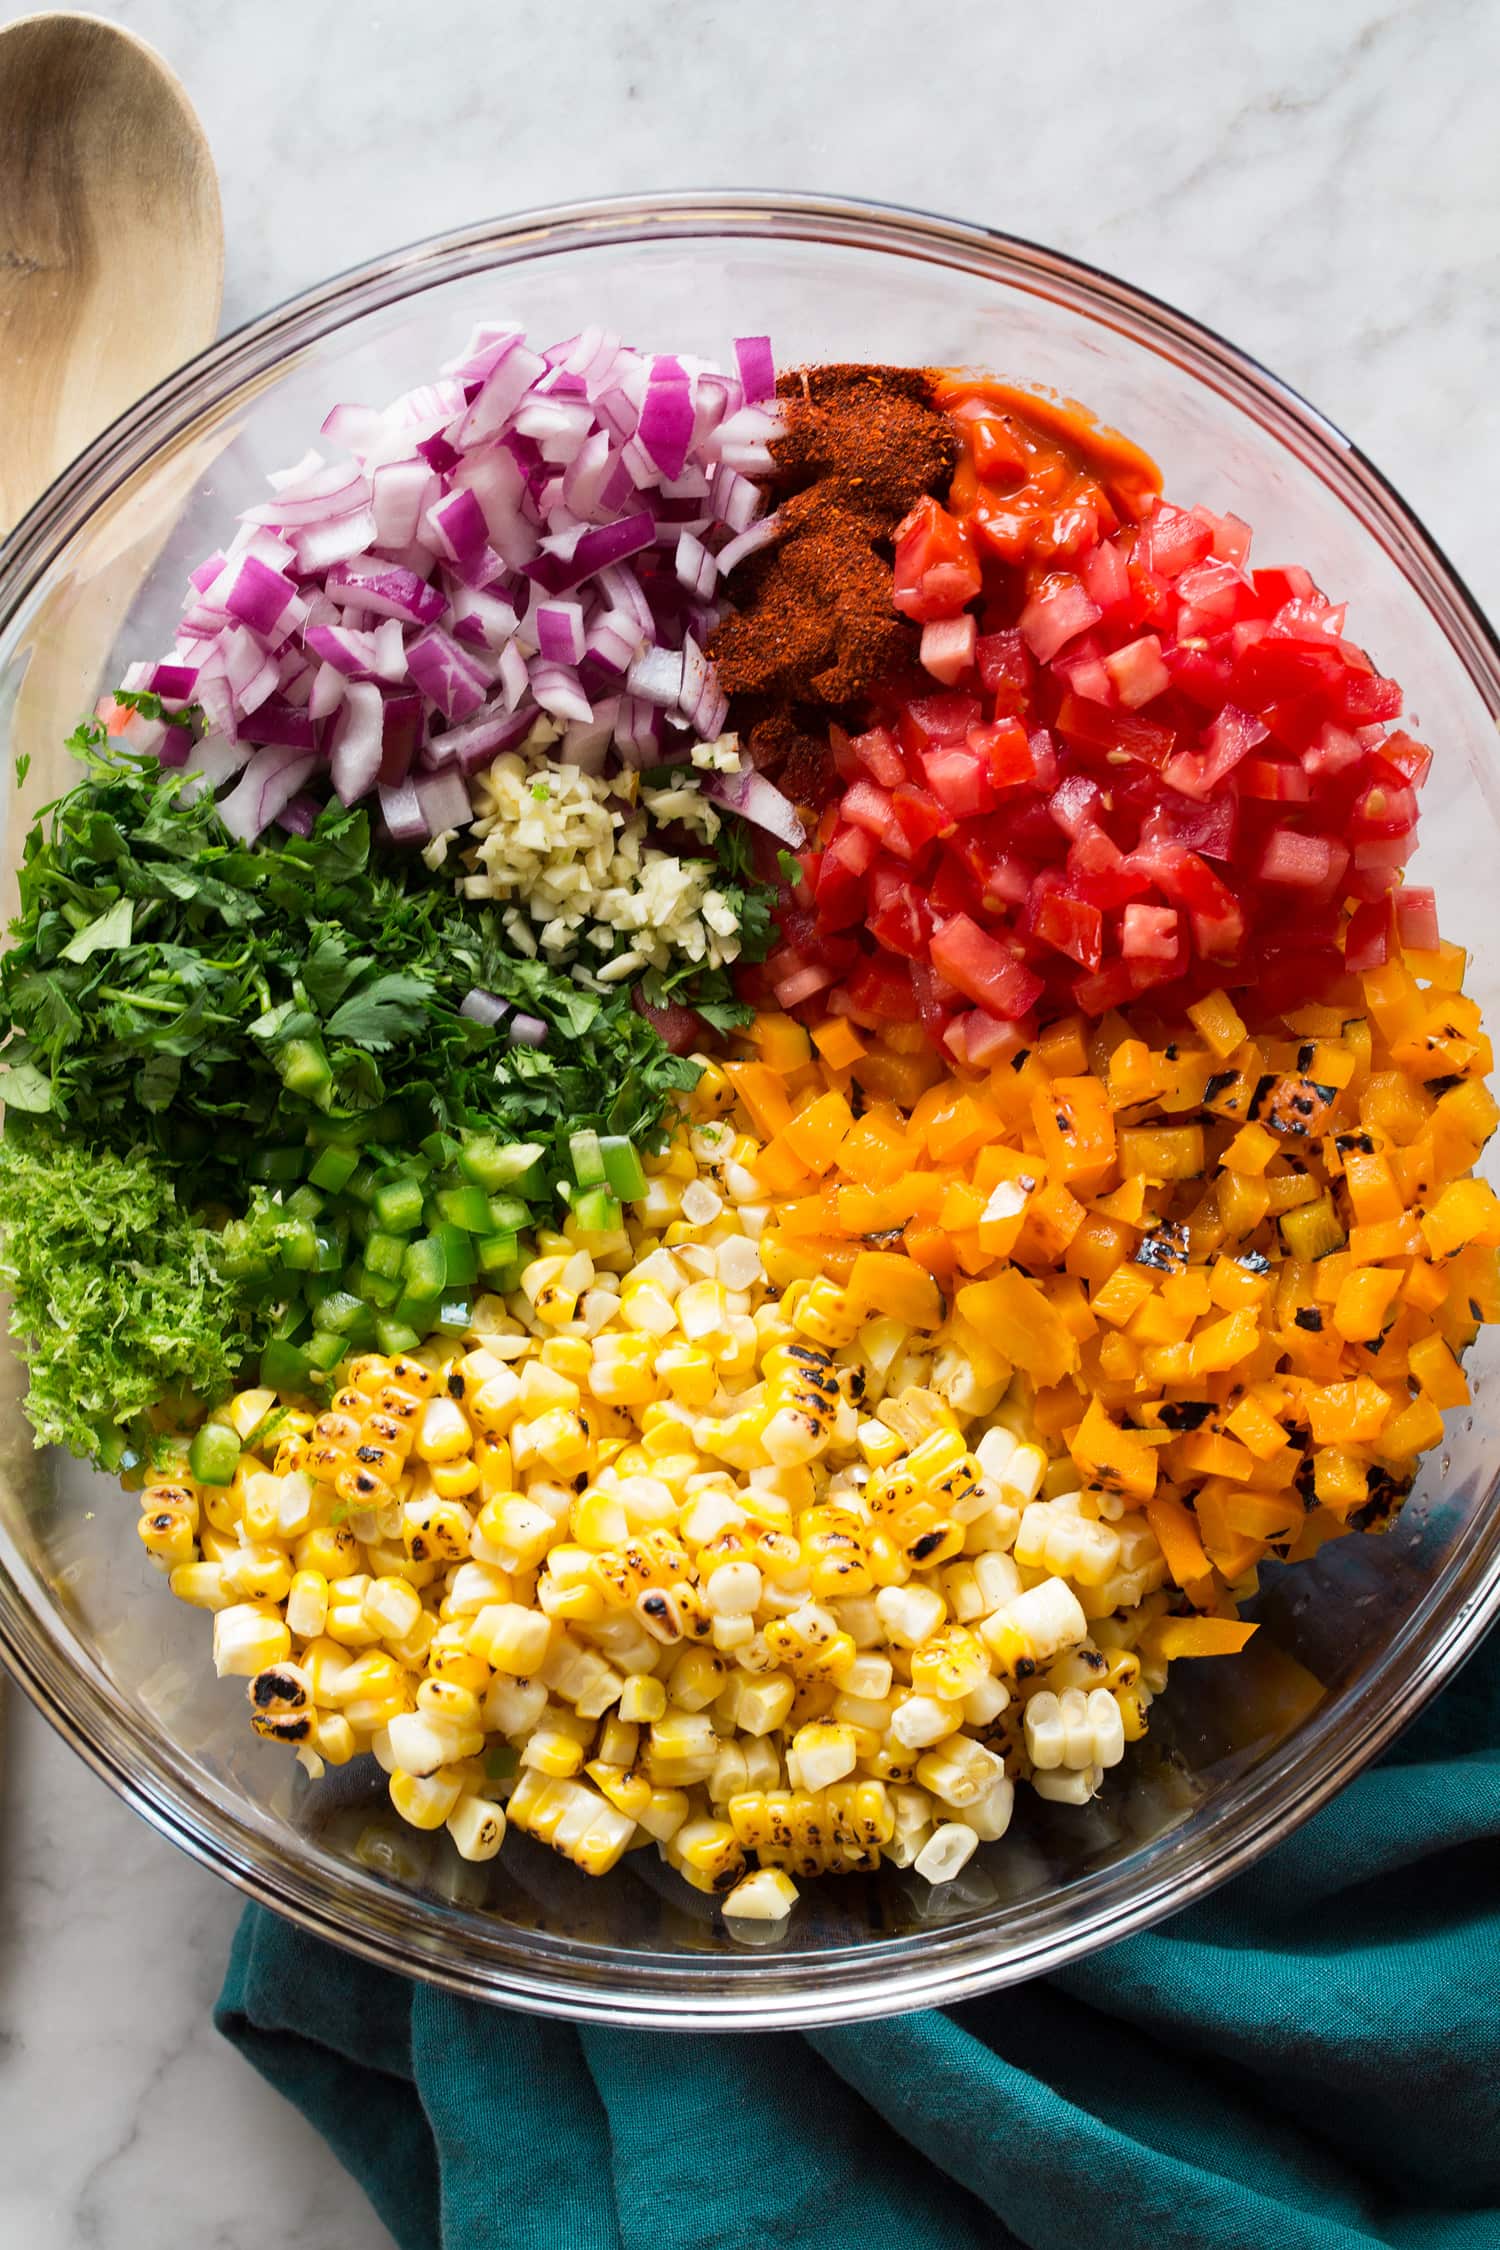 Rainbow of corn salsa ingredients chopped in a mixing bowl before tossing.